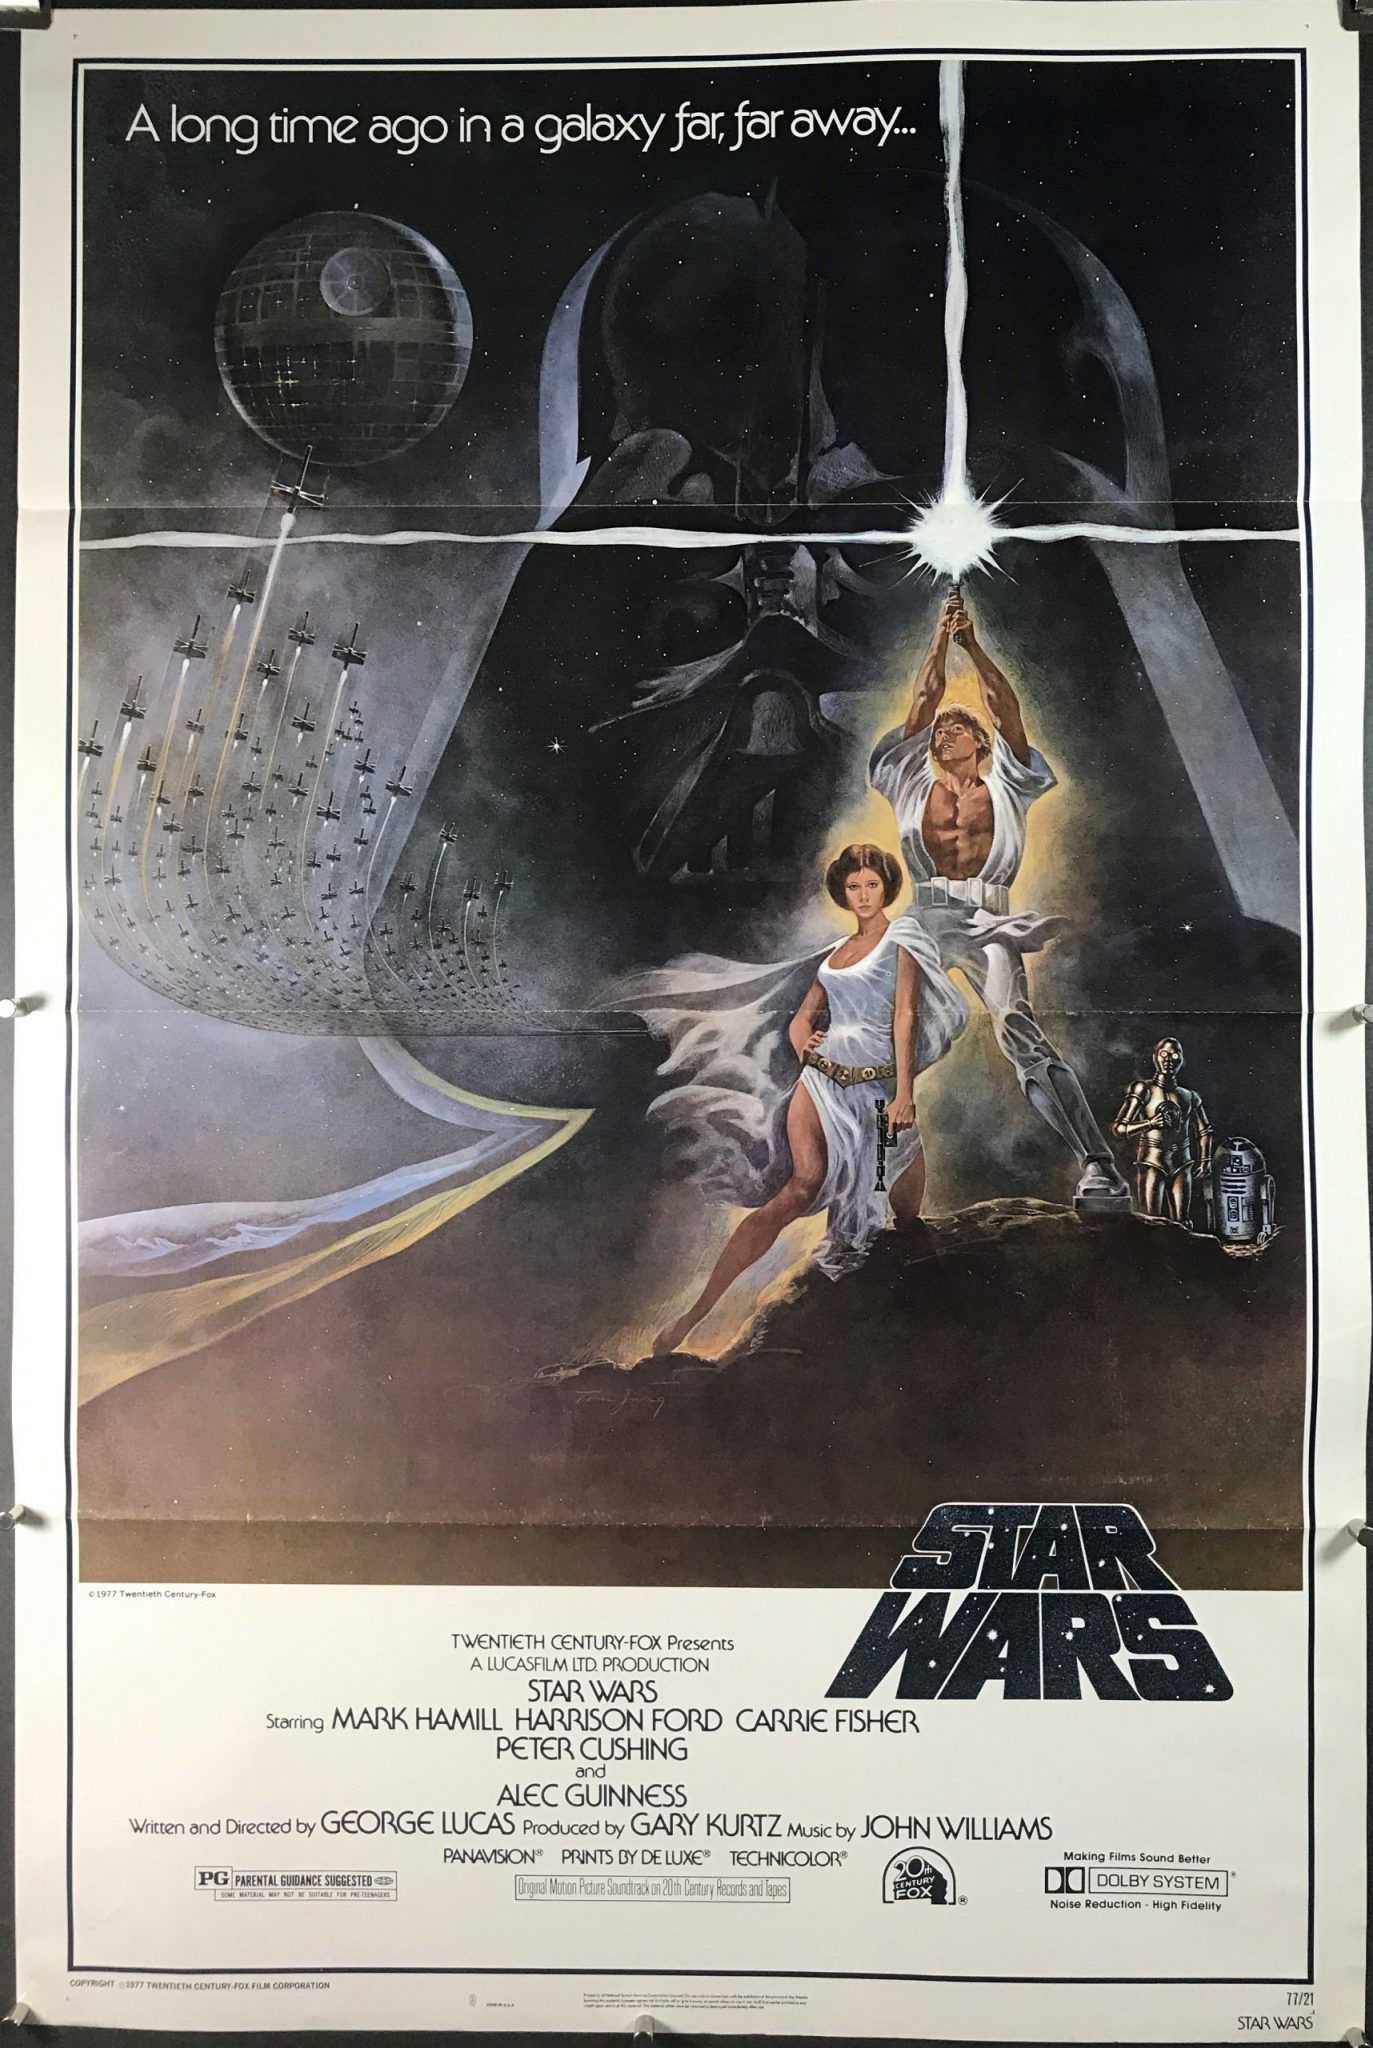 STAR WARS, Style A Original Trifold Movie Poster starring Marc Hamill